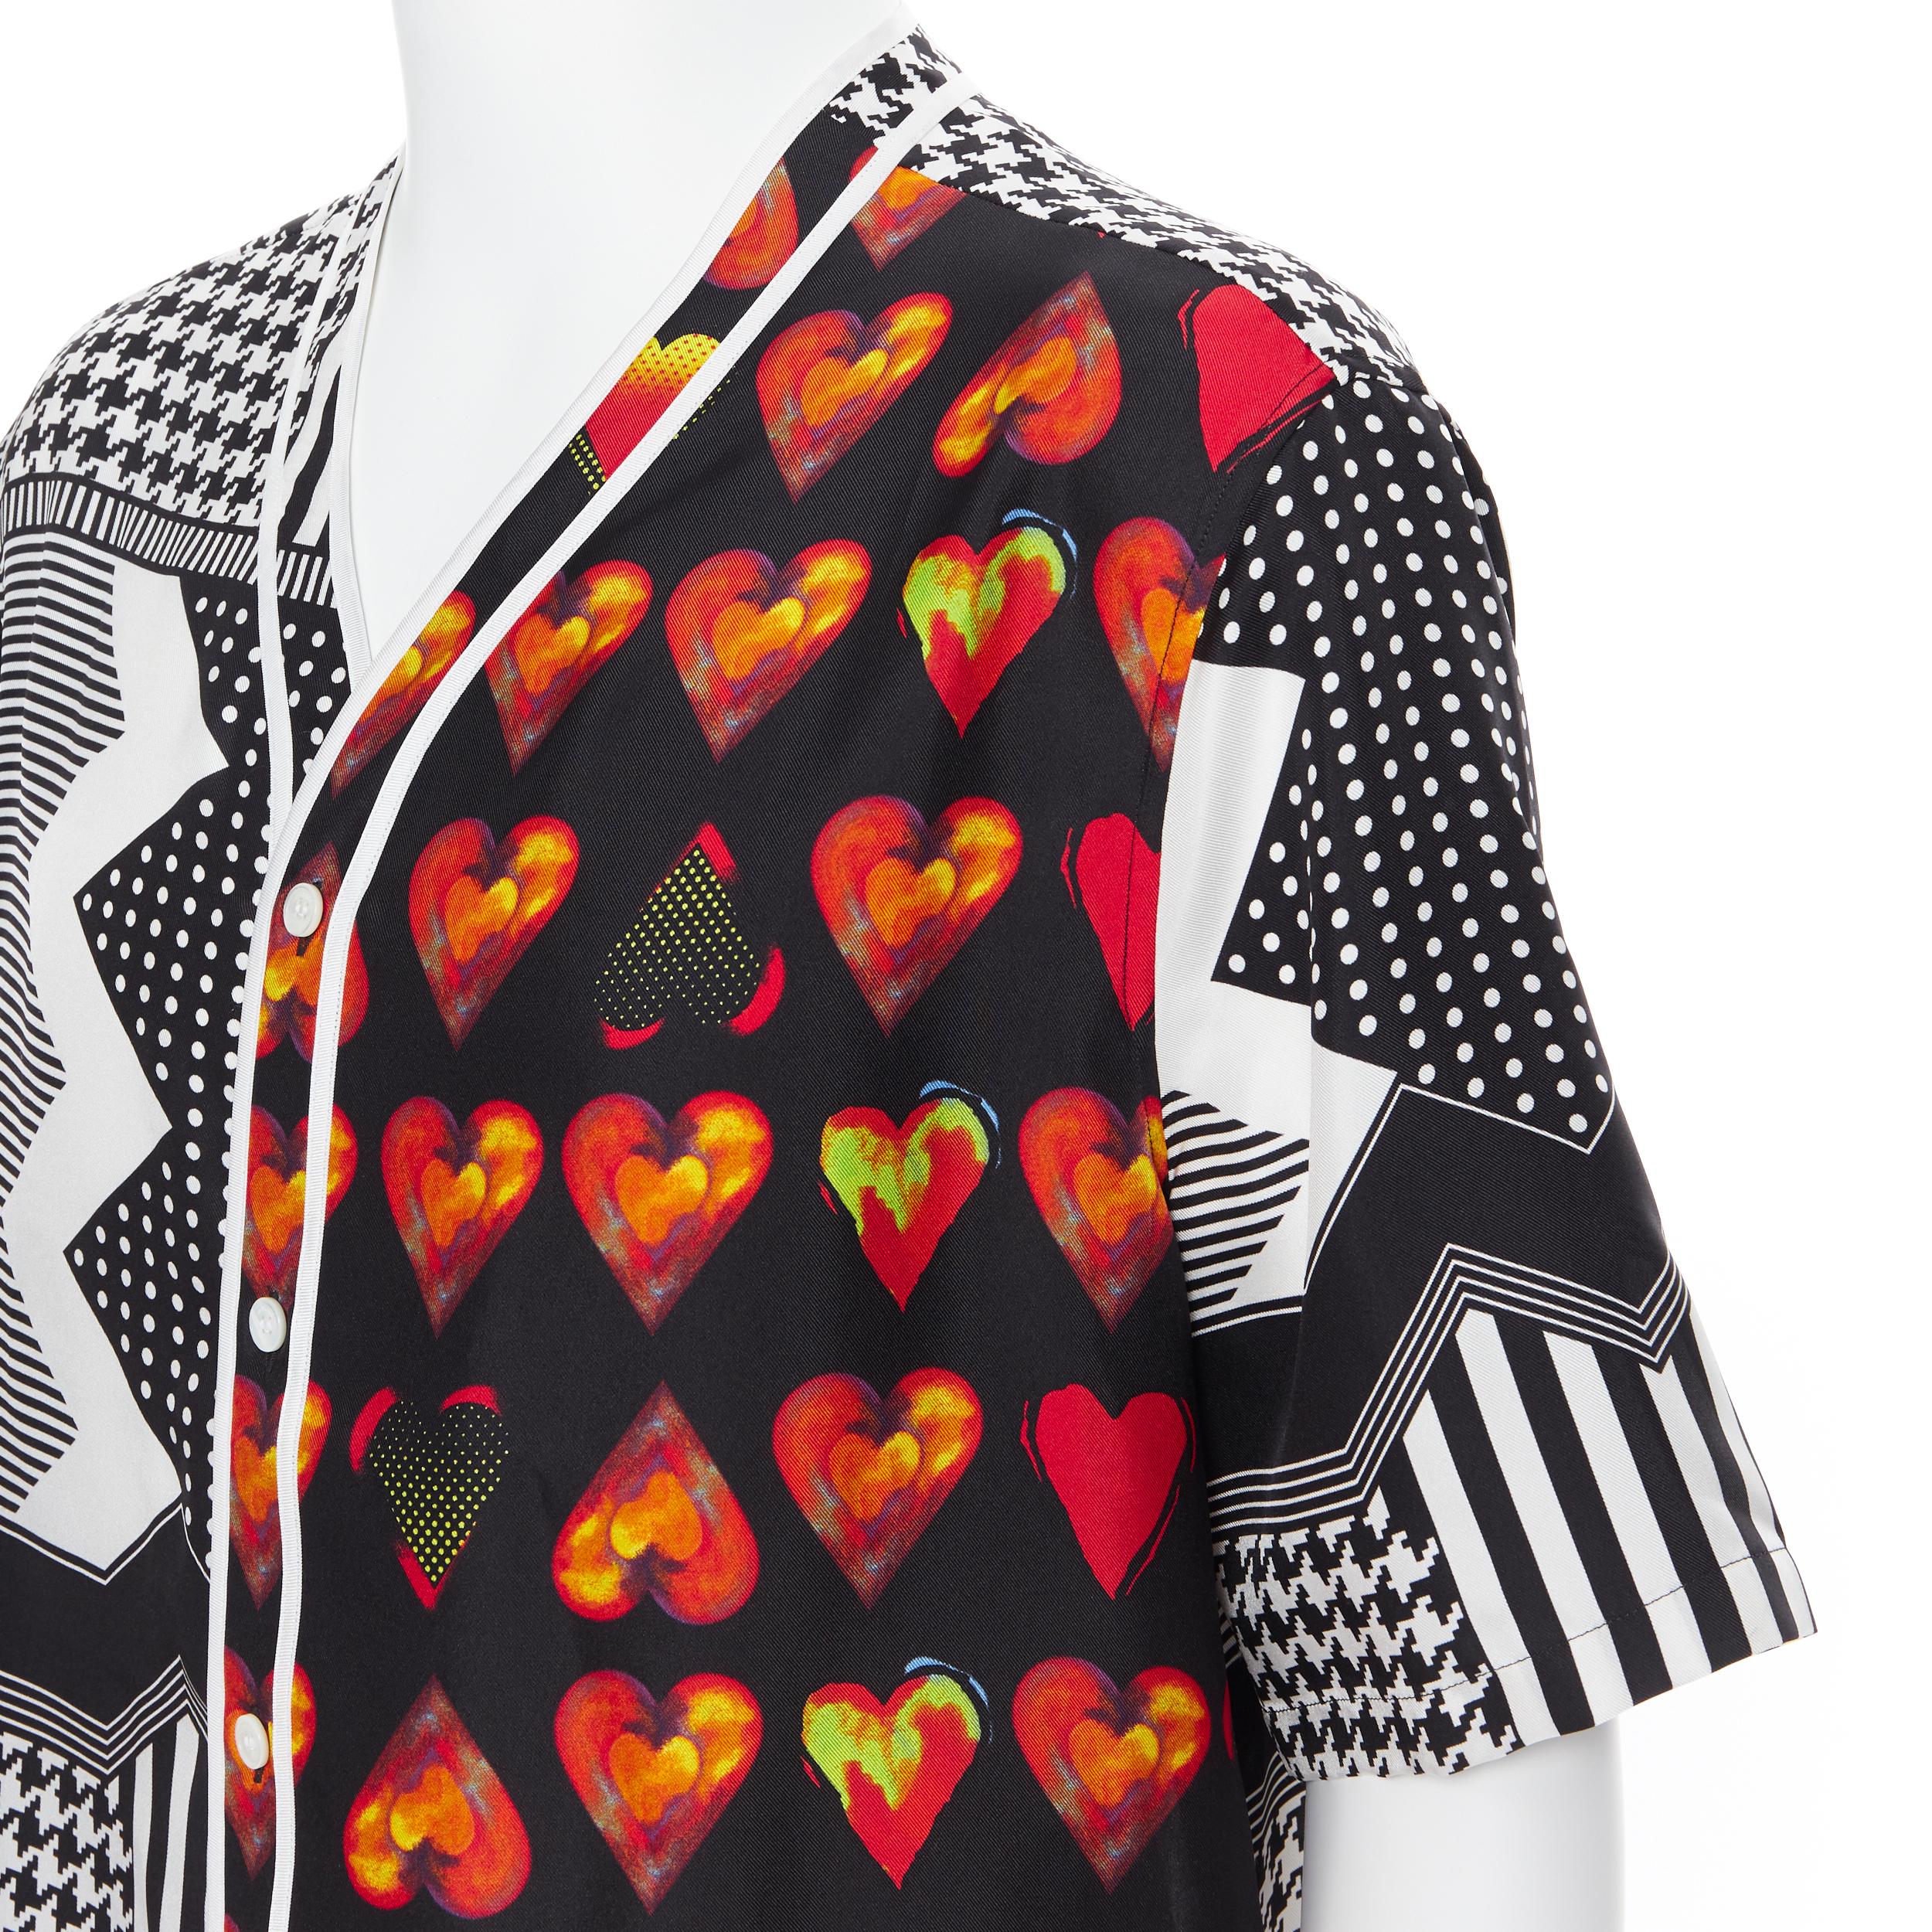 new VERSACE 2019 100% silk Double Love Heart geometric baseball shirt EU40 L
Brand: Versace
Designer: Donatella Versace
Collection: Pre-Fall 2019
Model Name / Style: Silk shirt
Material: Silk
Color: Black, red
Pattern: Abstract
Extra Detail: A79868